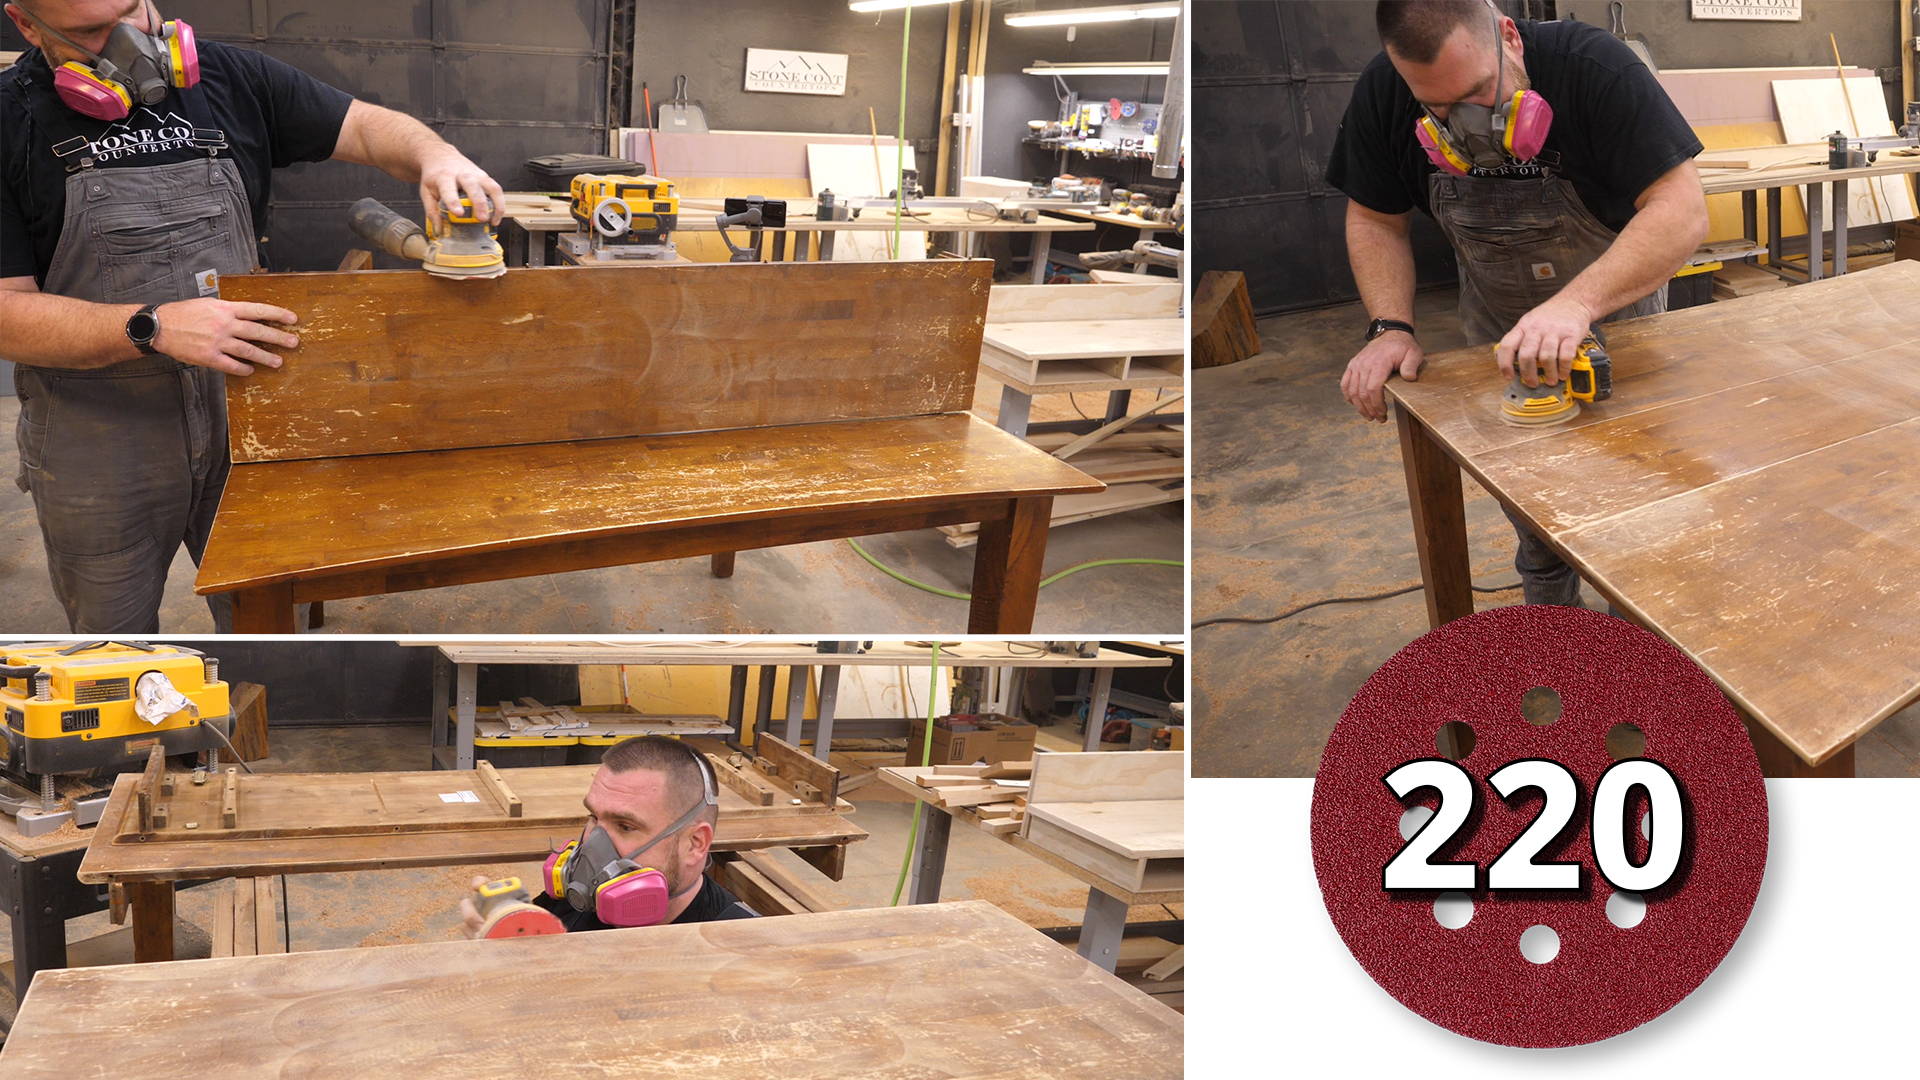 Step 2: Sand leaf and table surface - Use 220 grit sandpaper to roughen the surface for a strong mechanical bond.